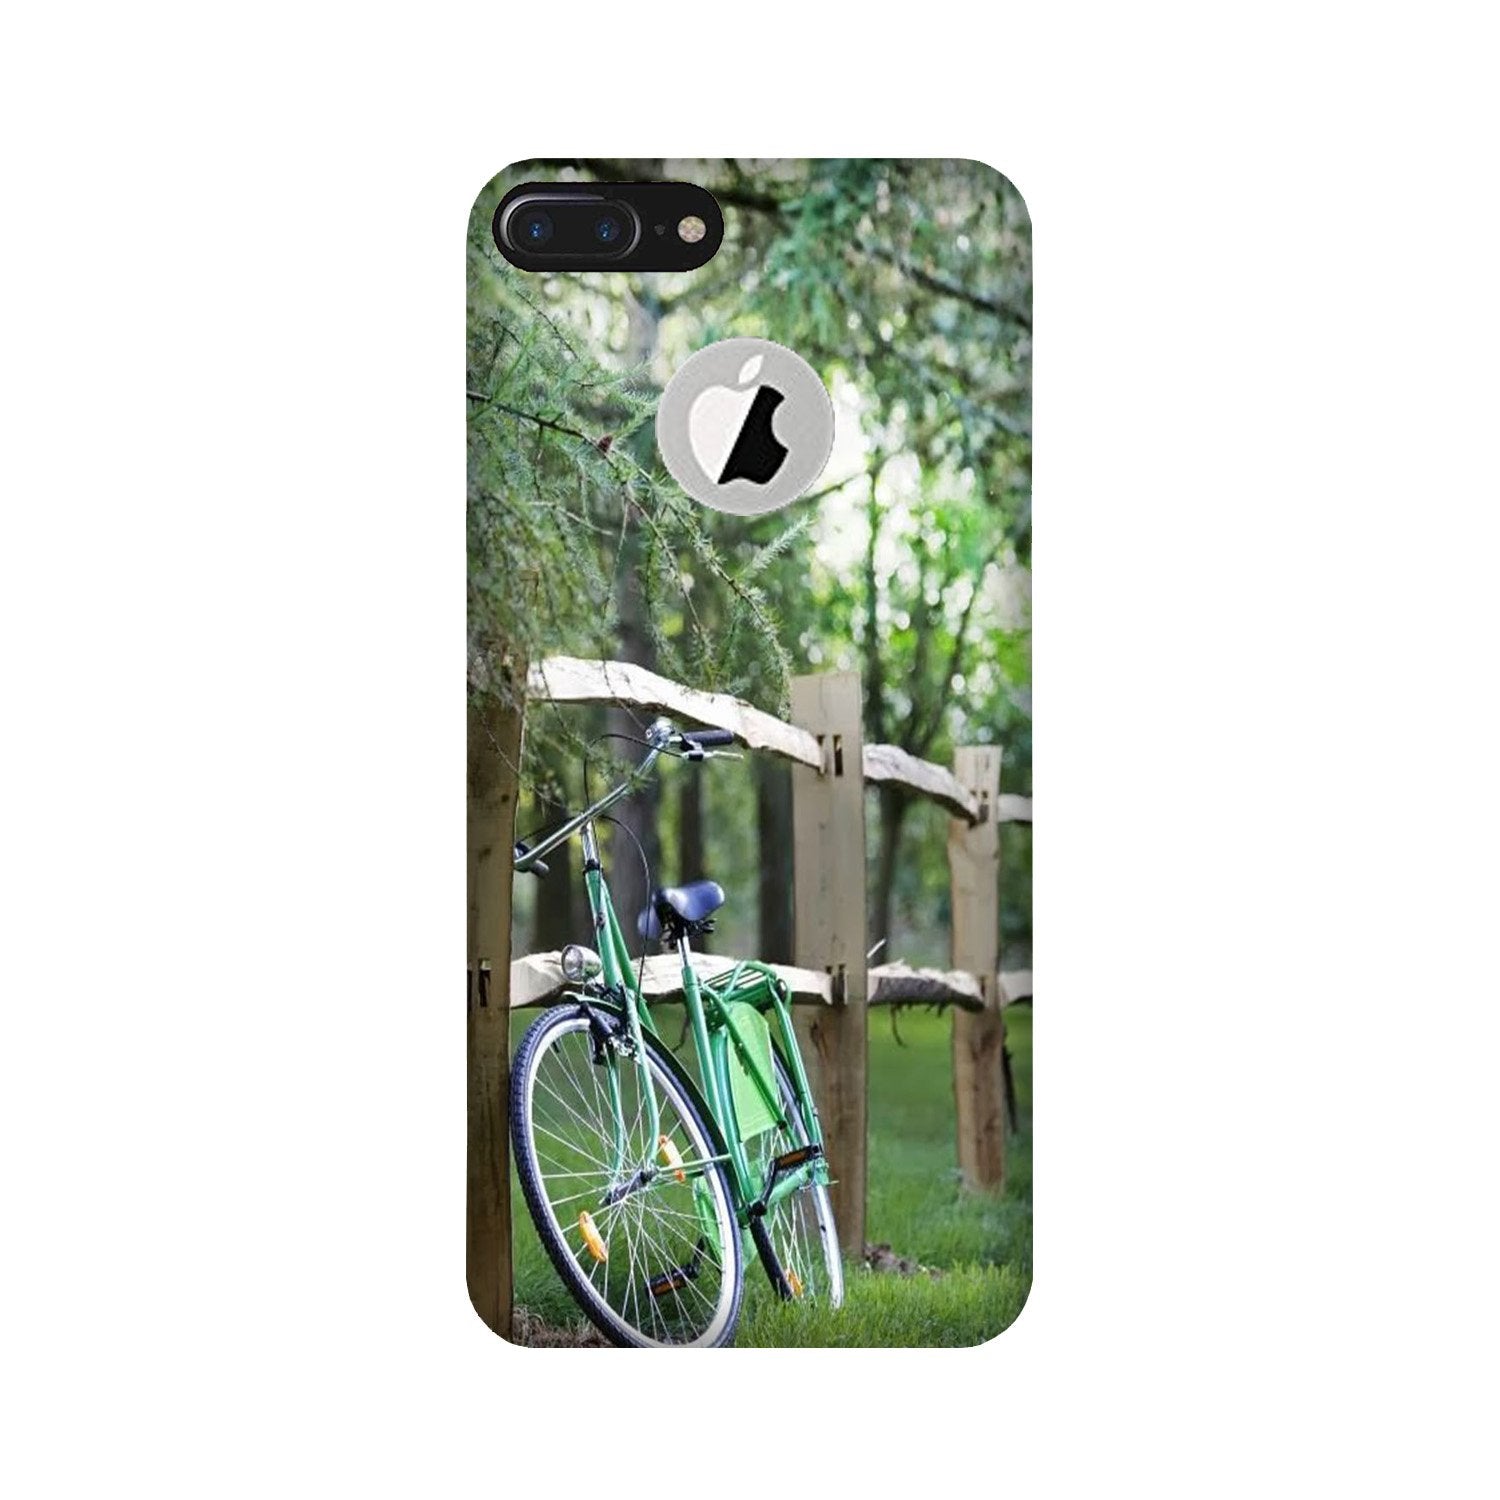 Bicycle Case for iPhone 7 Plus logo cut (Design No. 208)